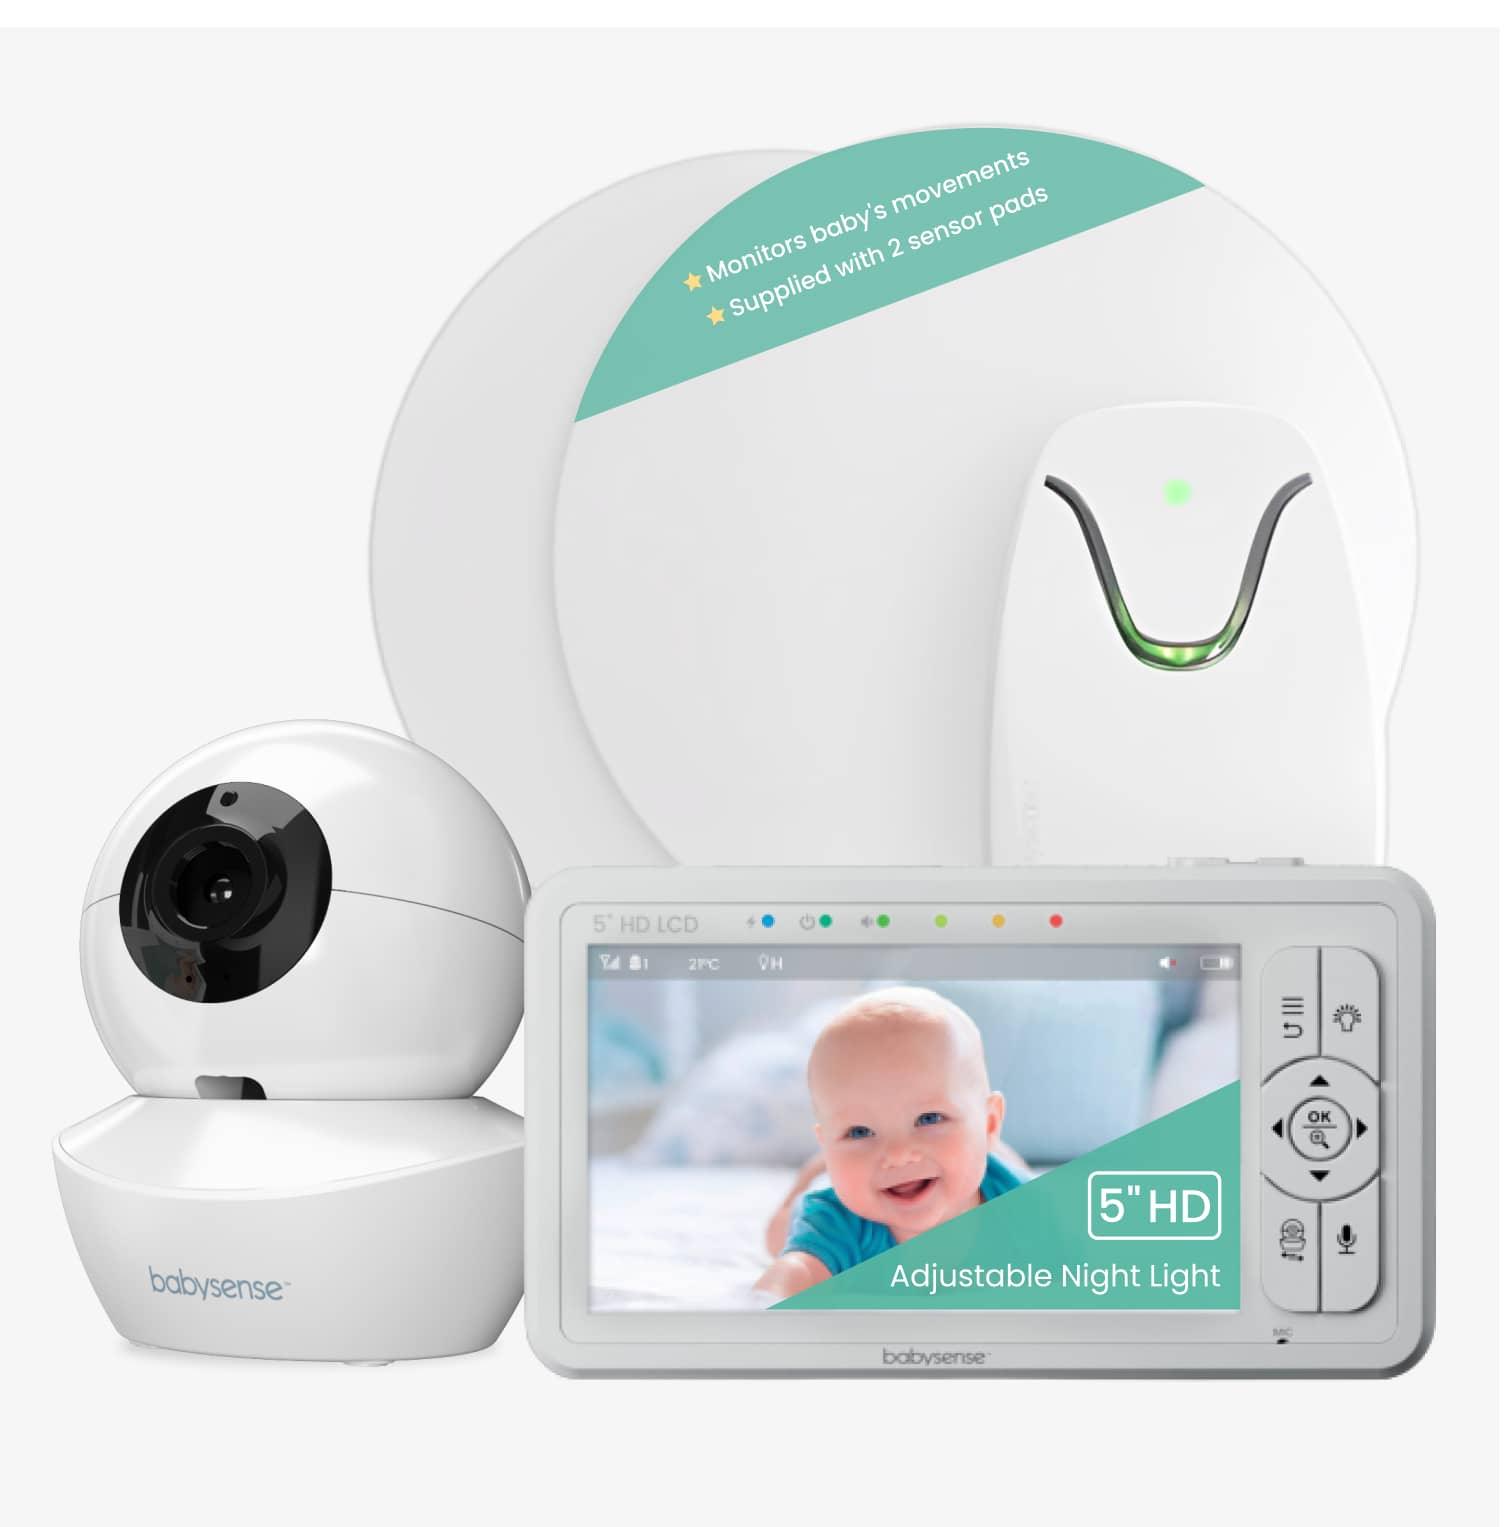 Baby Products Online - Babysense Extra Camera Unit for Video Baby